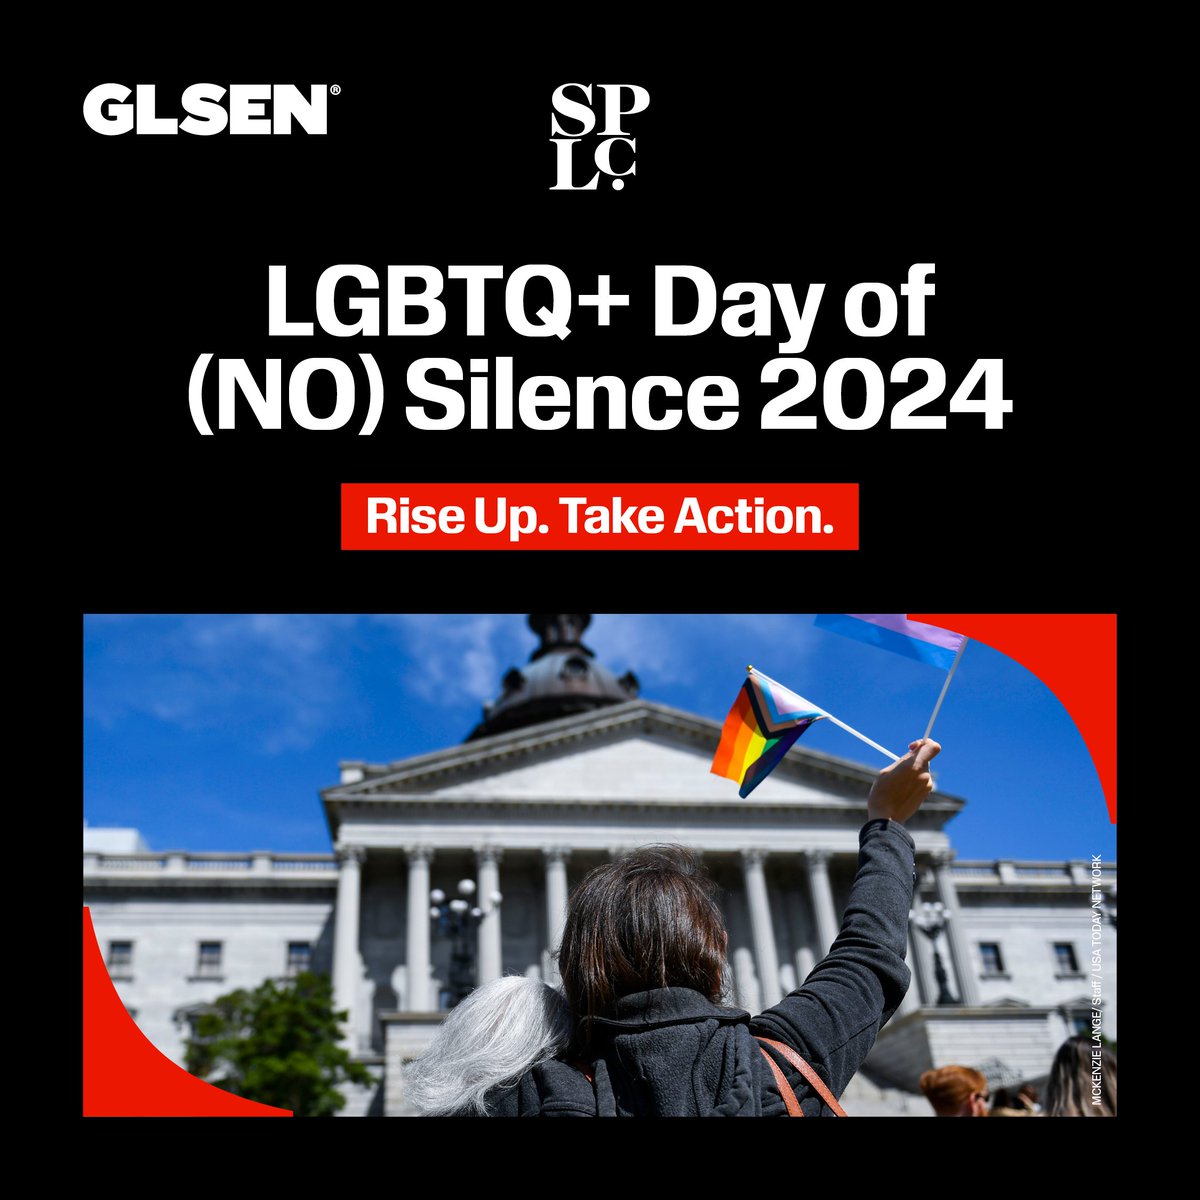 The SPLC joins @GLSEN’s #DayofNOSilence, where LGBTQ+ people and allies all around the world protest the harmful effects of harassment and discrimination against #LGBTQ+ people. We must speak out against hate and violence & take a stand against legislating anti-LGBTQ+ hate. #OTD